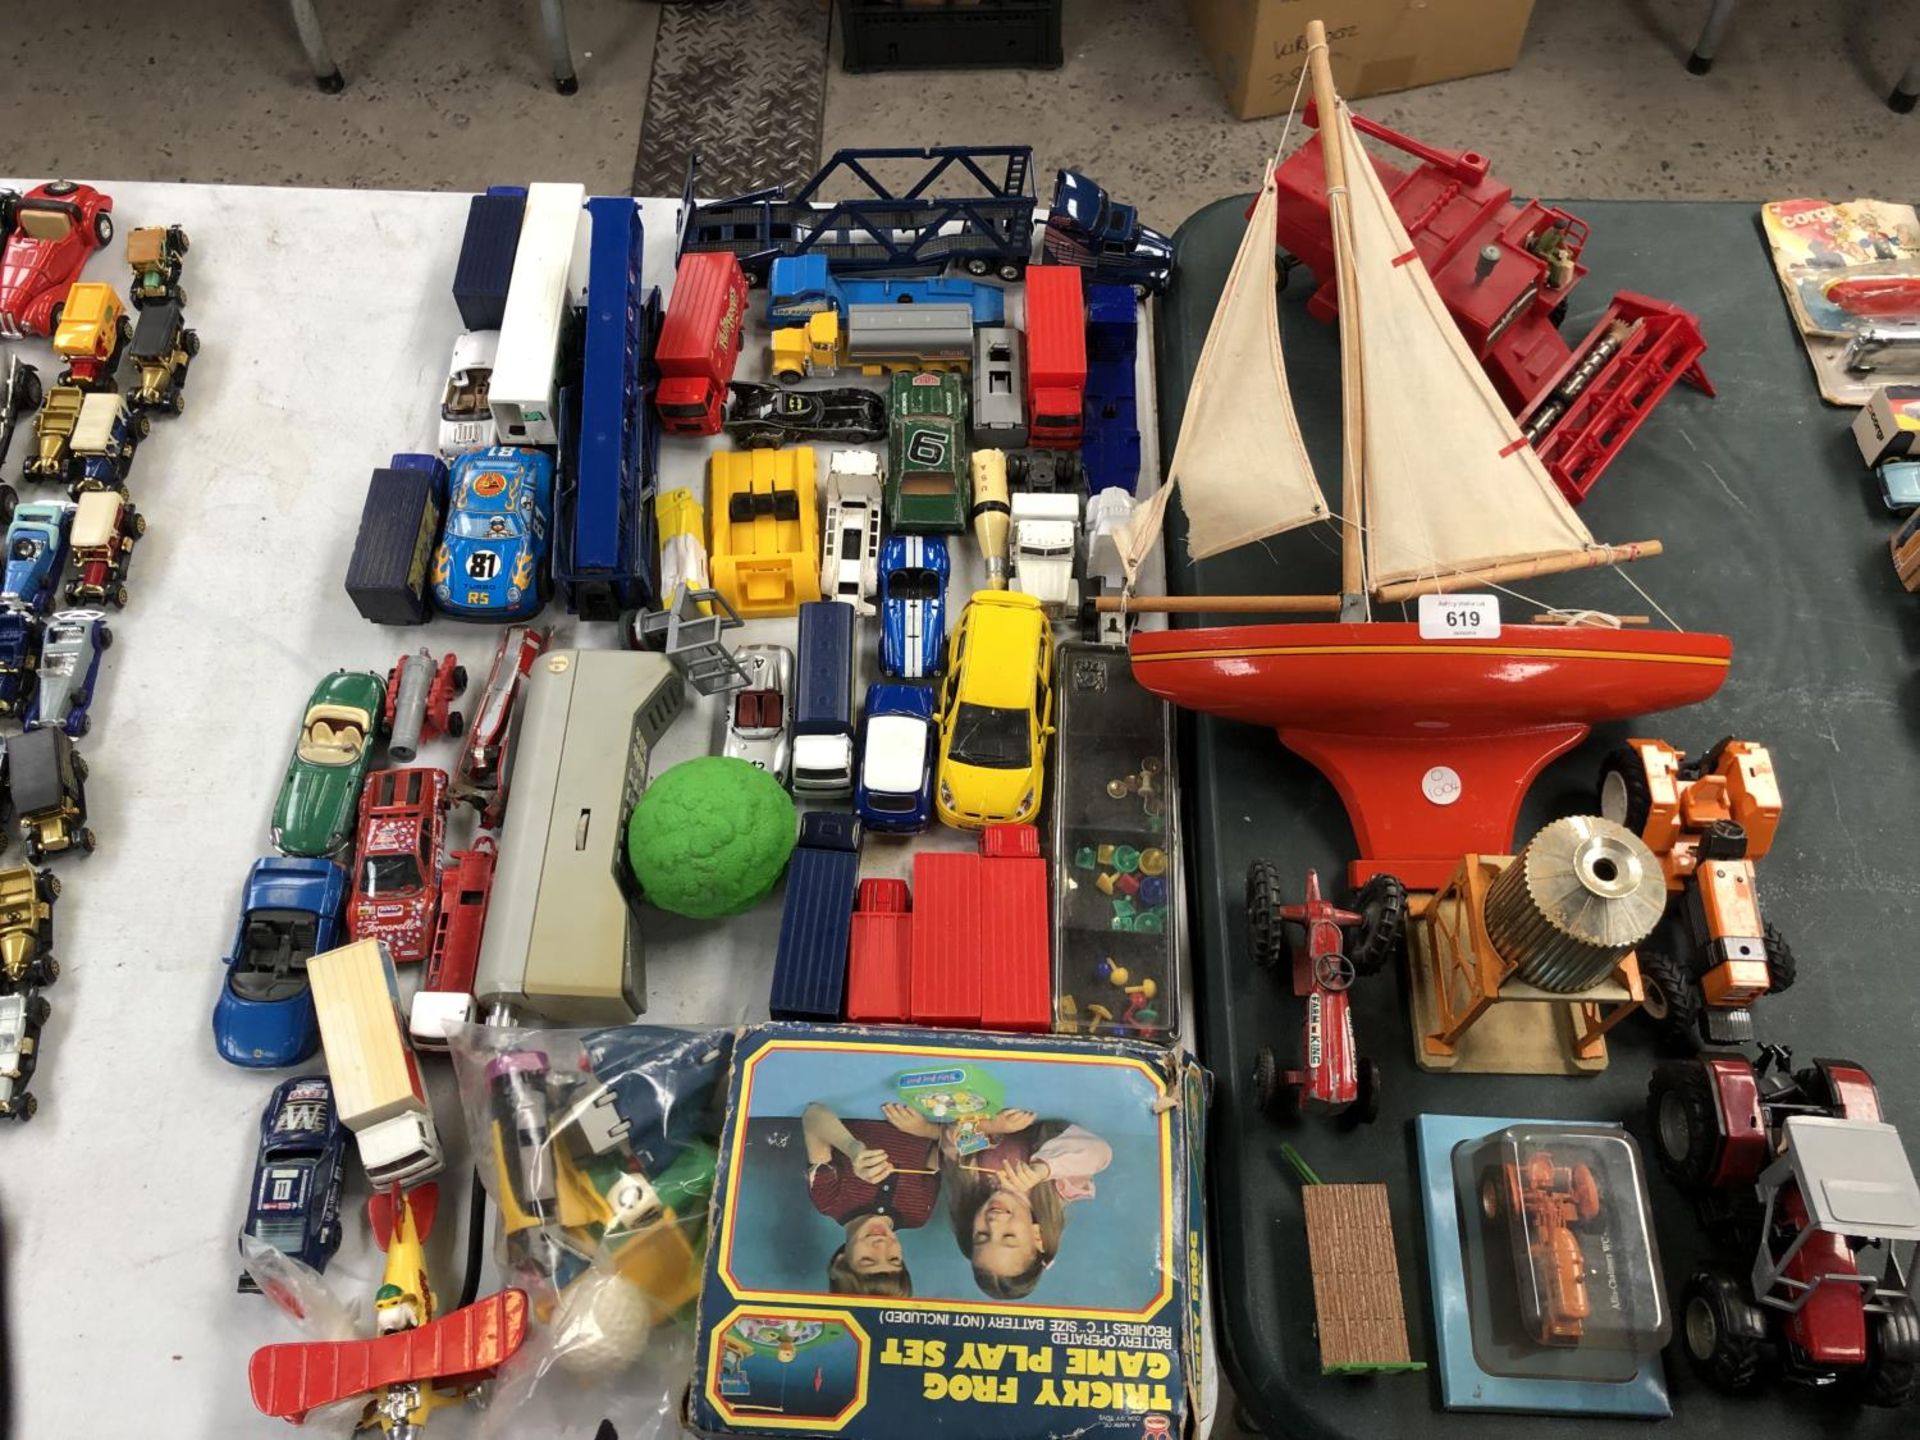 MIXED TOYS - DIE CAST LOOSE MODELS, WOODEN POND YACHT, TRACTOR MODELS ETC